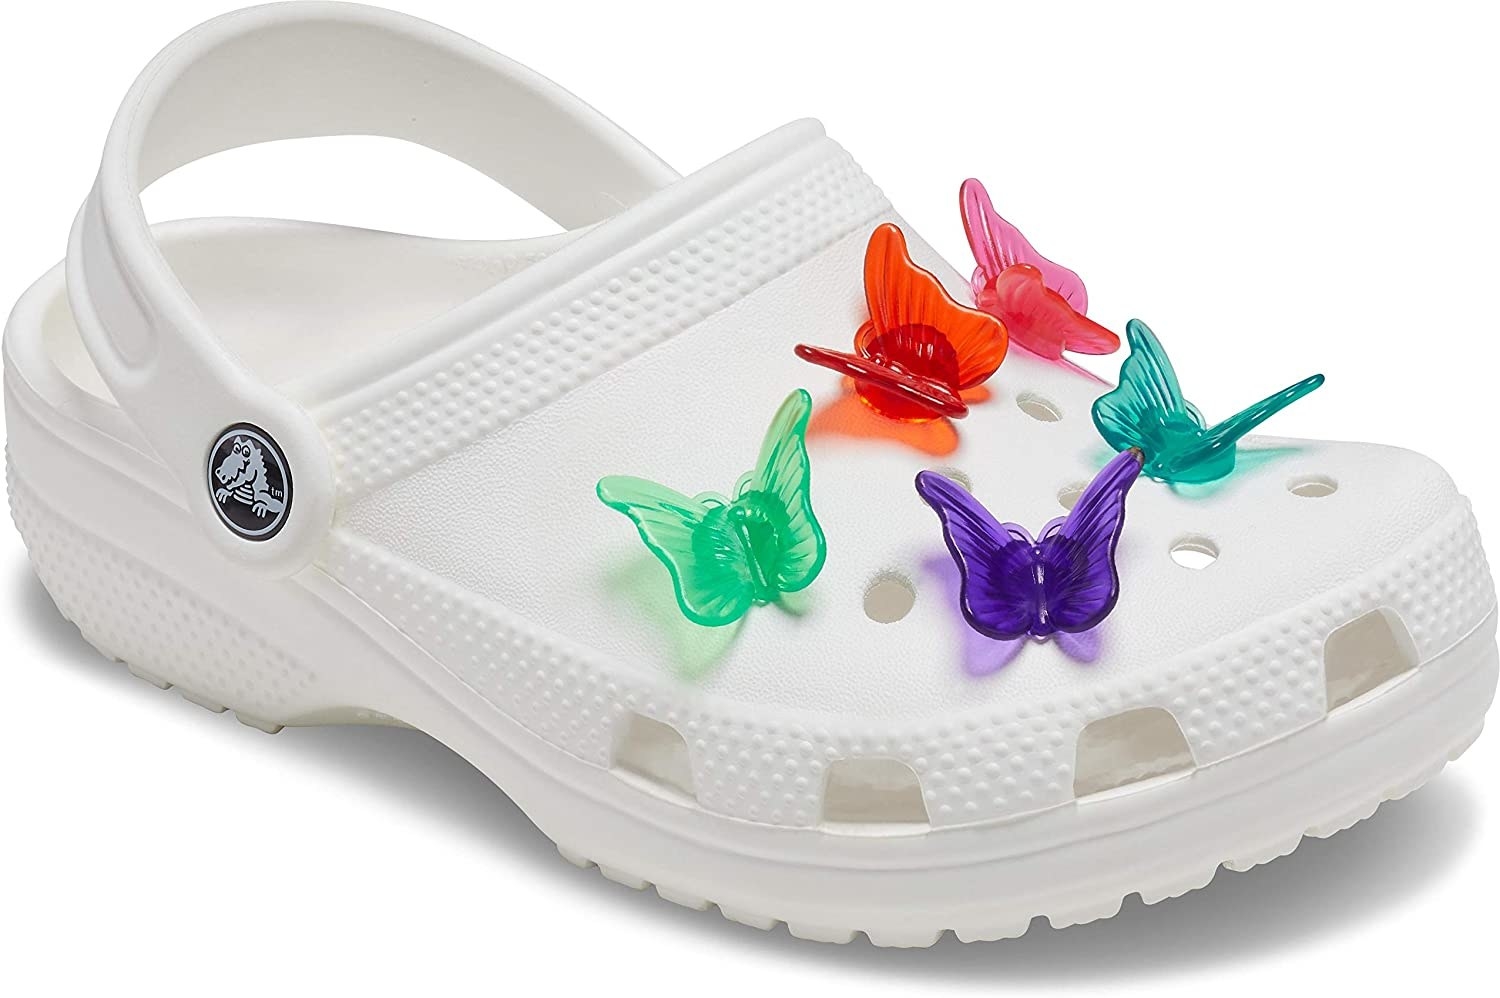 Green, red, pink, purple, and blue butterfly clip croc charms on a pair of white crocs